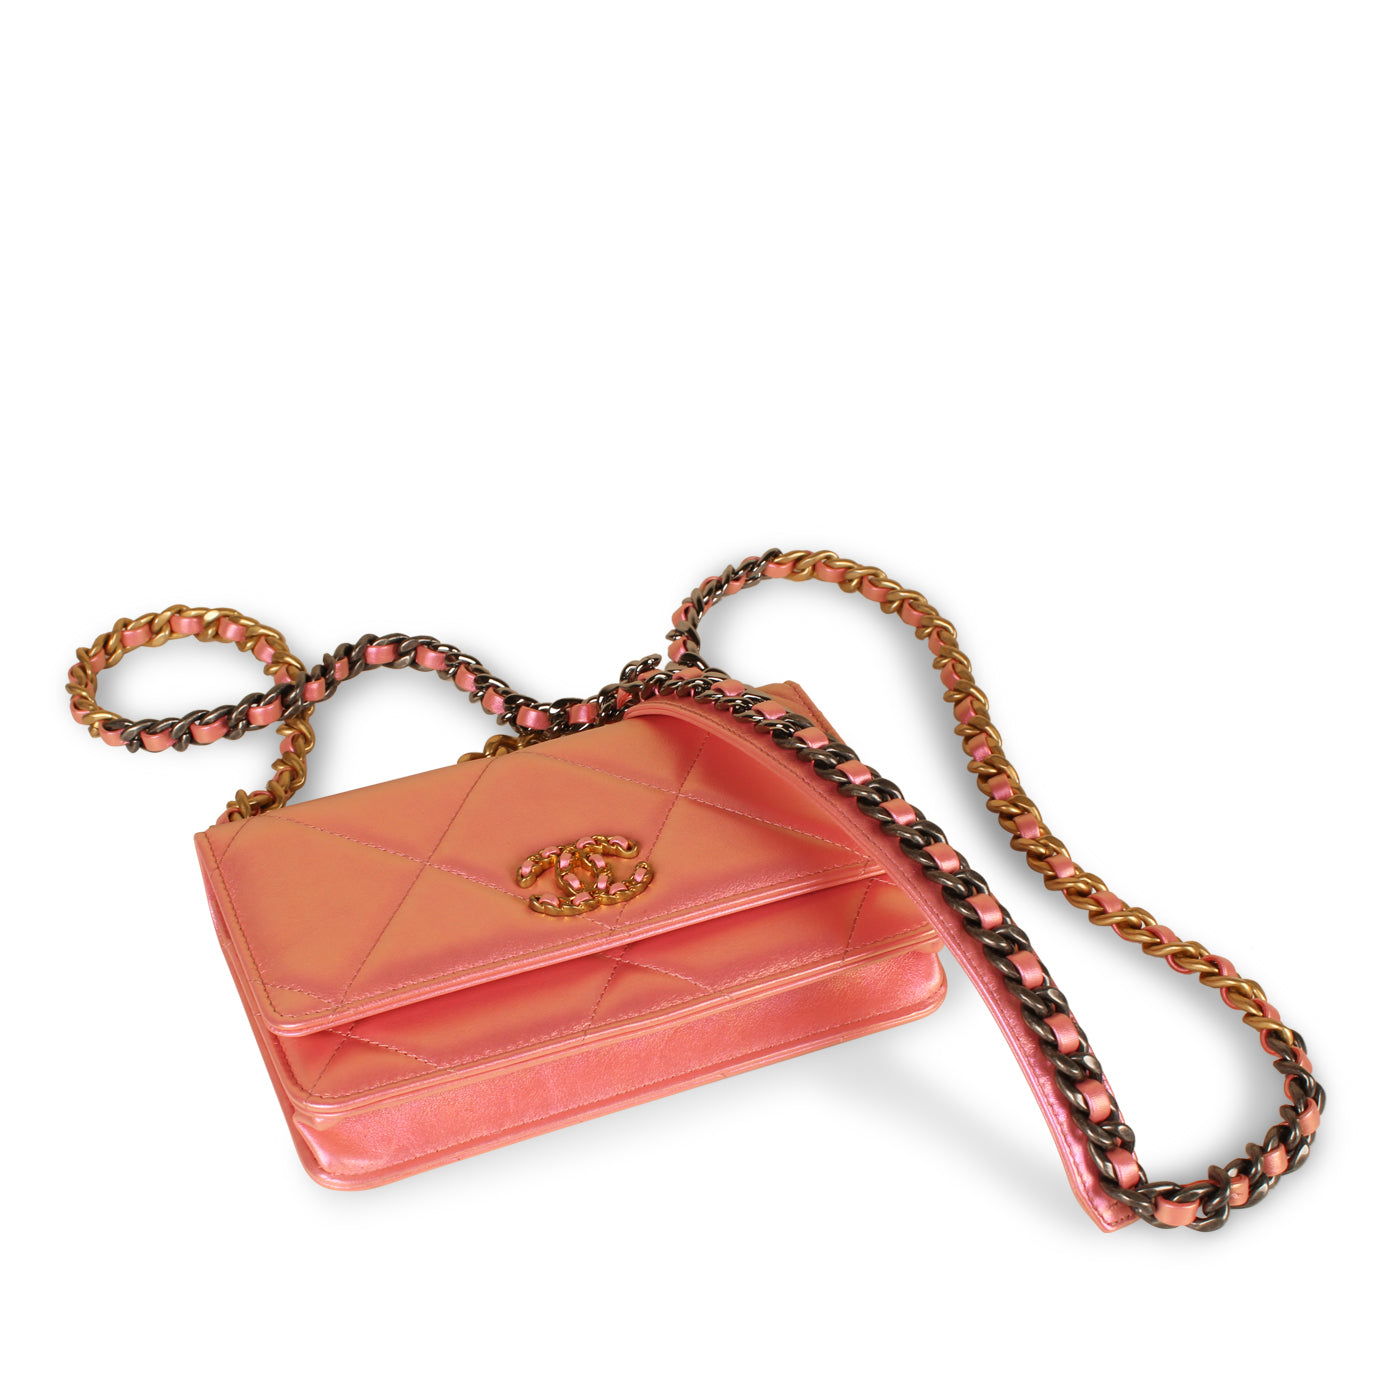 Chanel - Chanel 19 Flap WOC - Wallet on Chain - Hot Pink